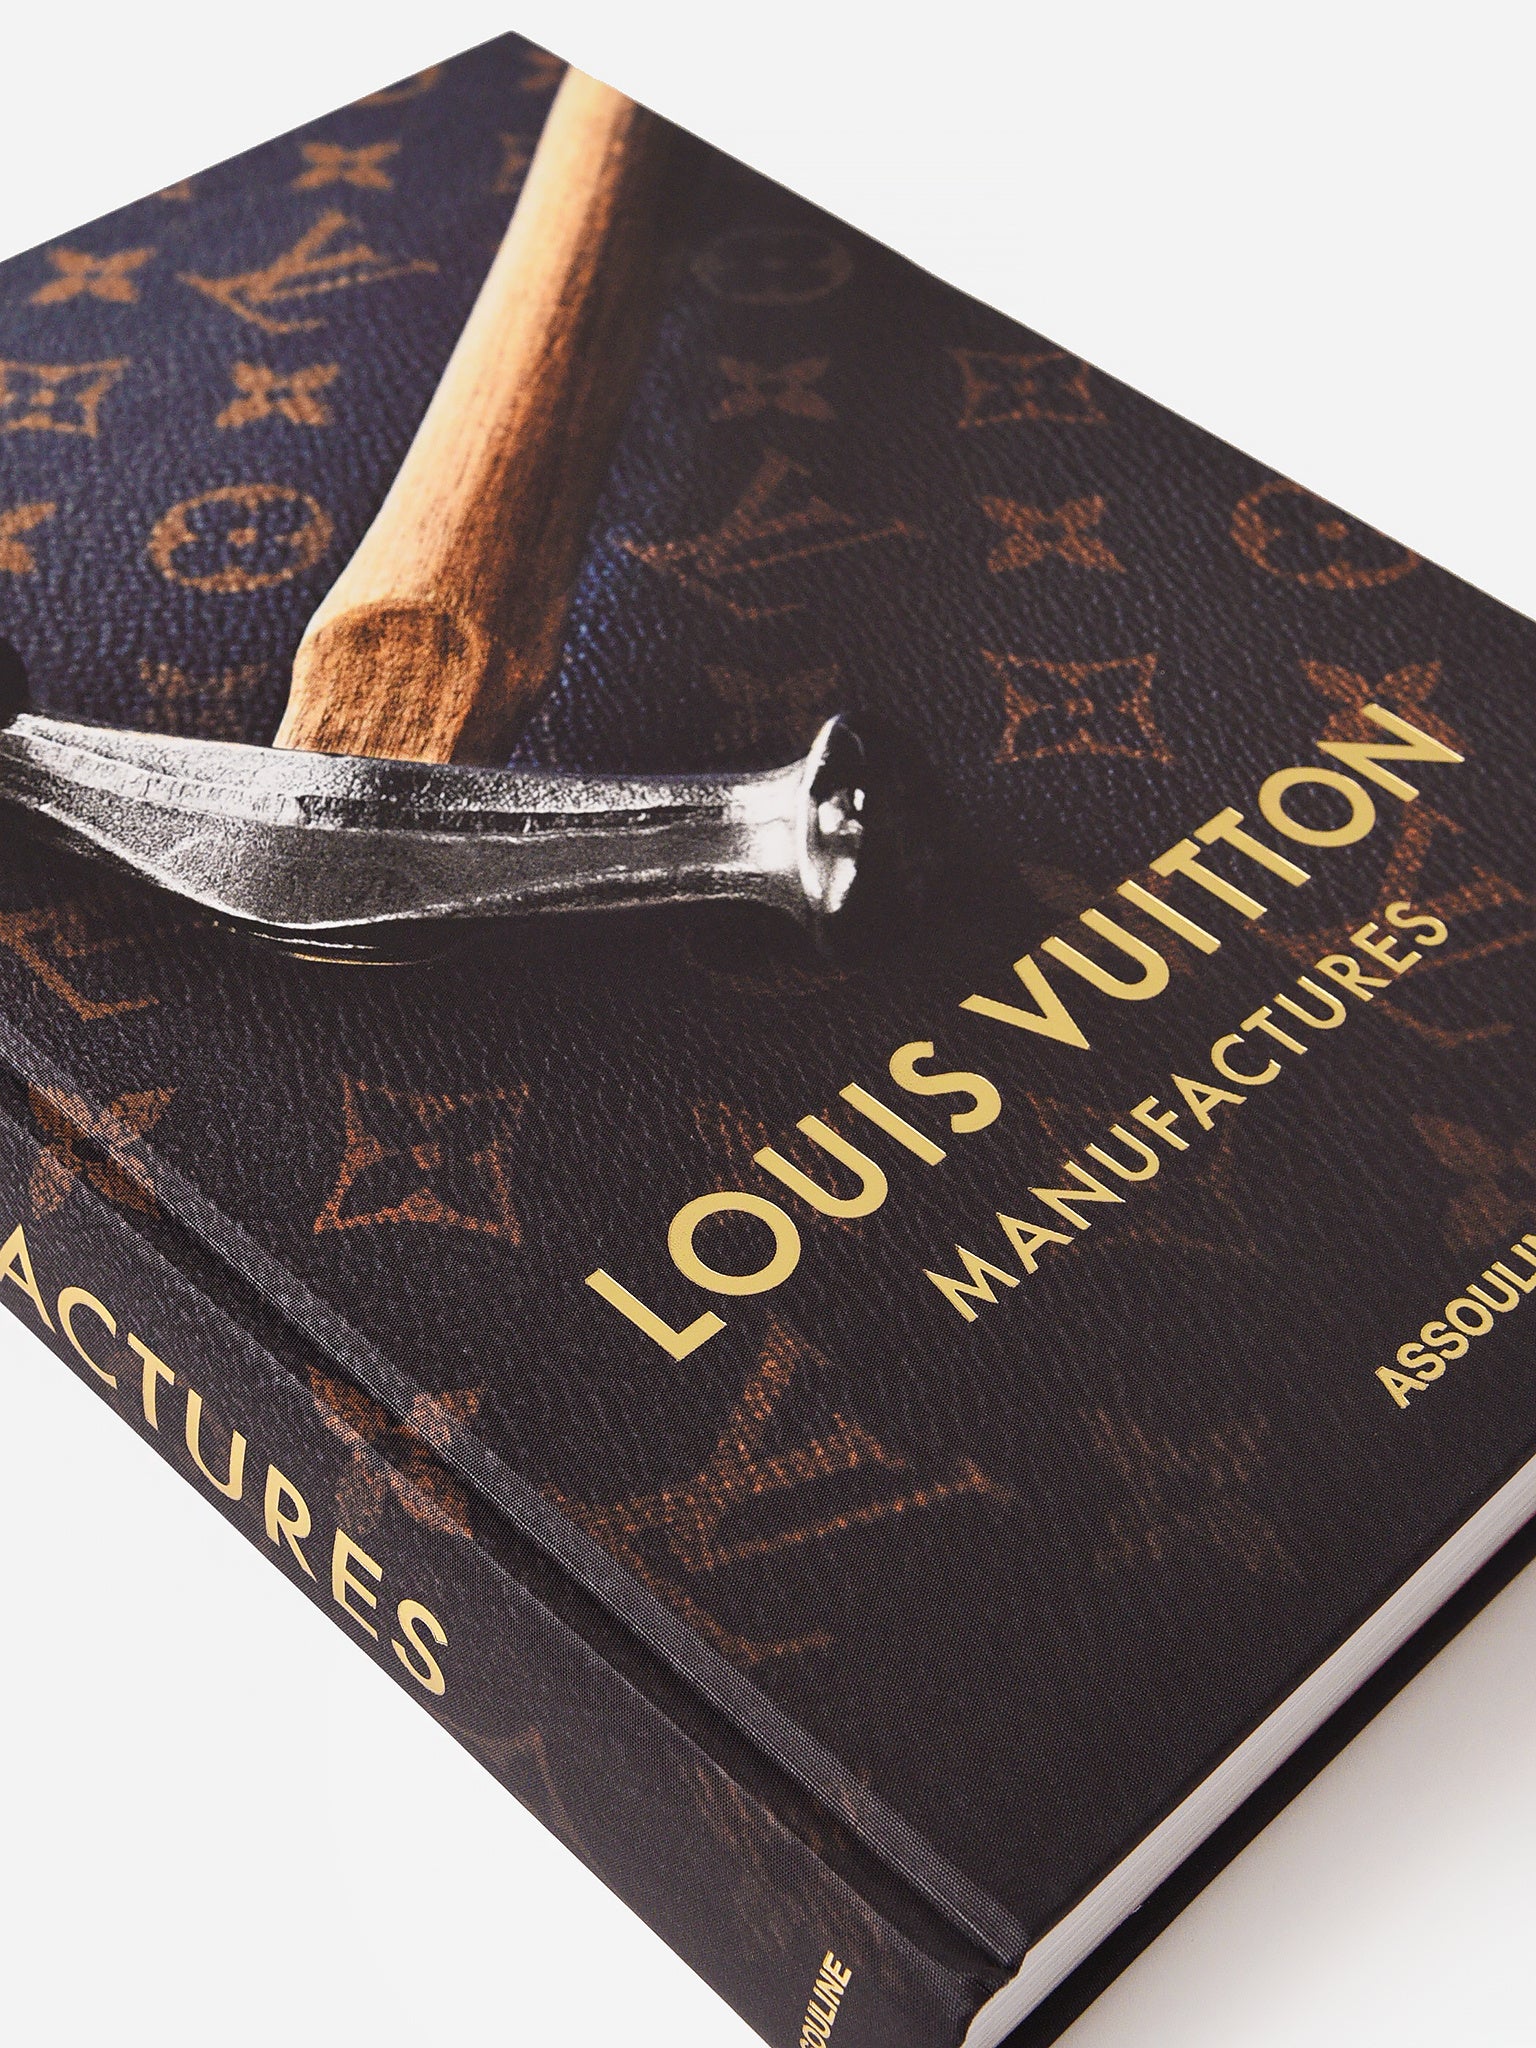 Louis Vuitton Catwalk English version  Art of Living  Books and  Stationery  LOUIS VUITTON 